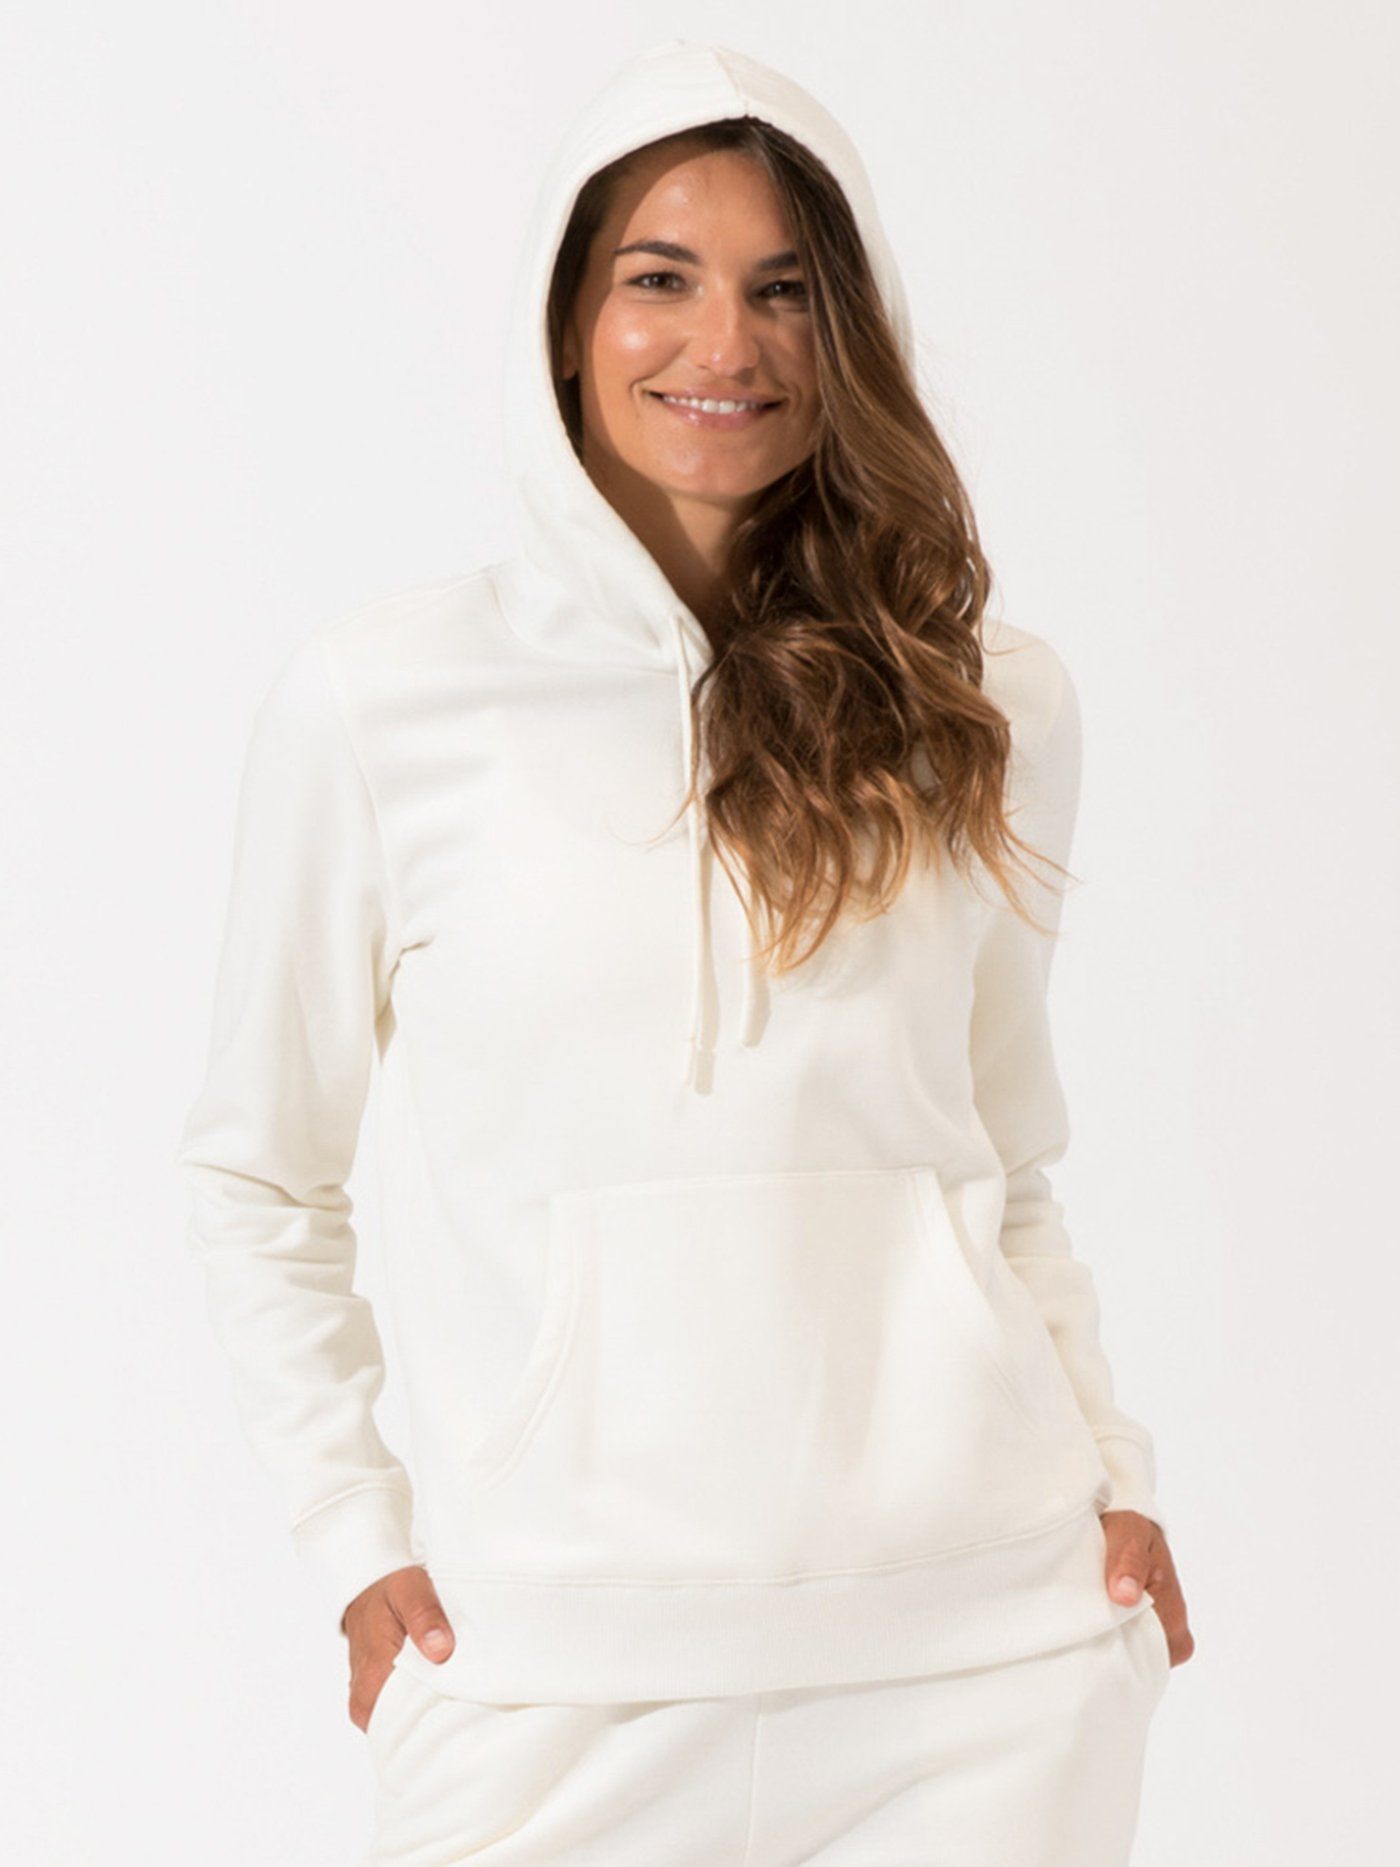 WoInvincible Fleece Pullover Hoodie Womens Outerwear Hoodie Threads 4 Thought 